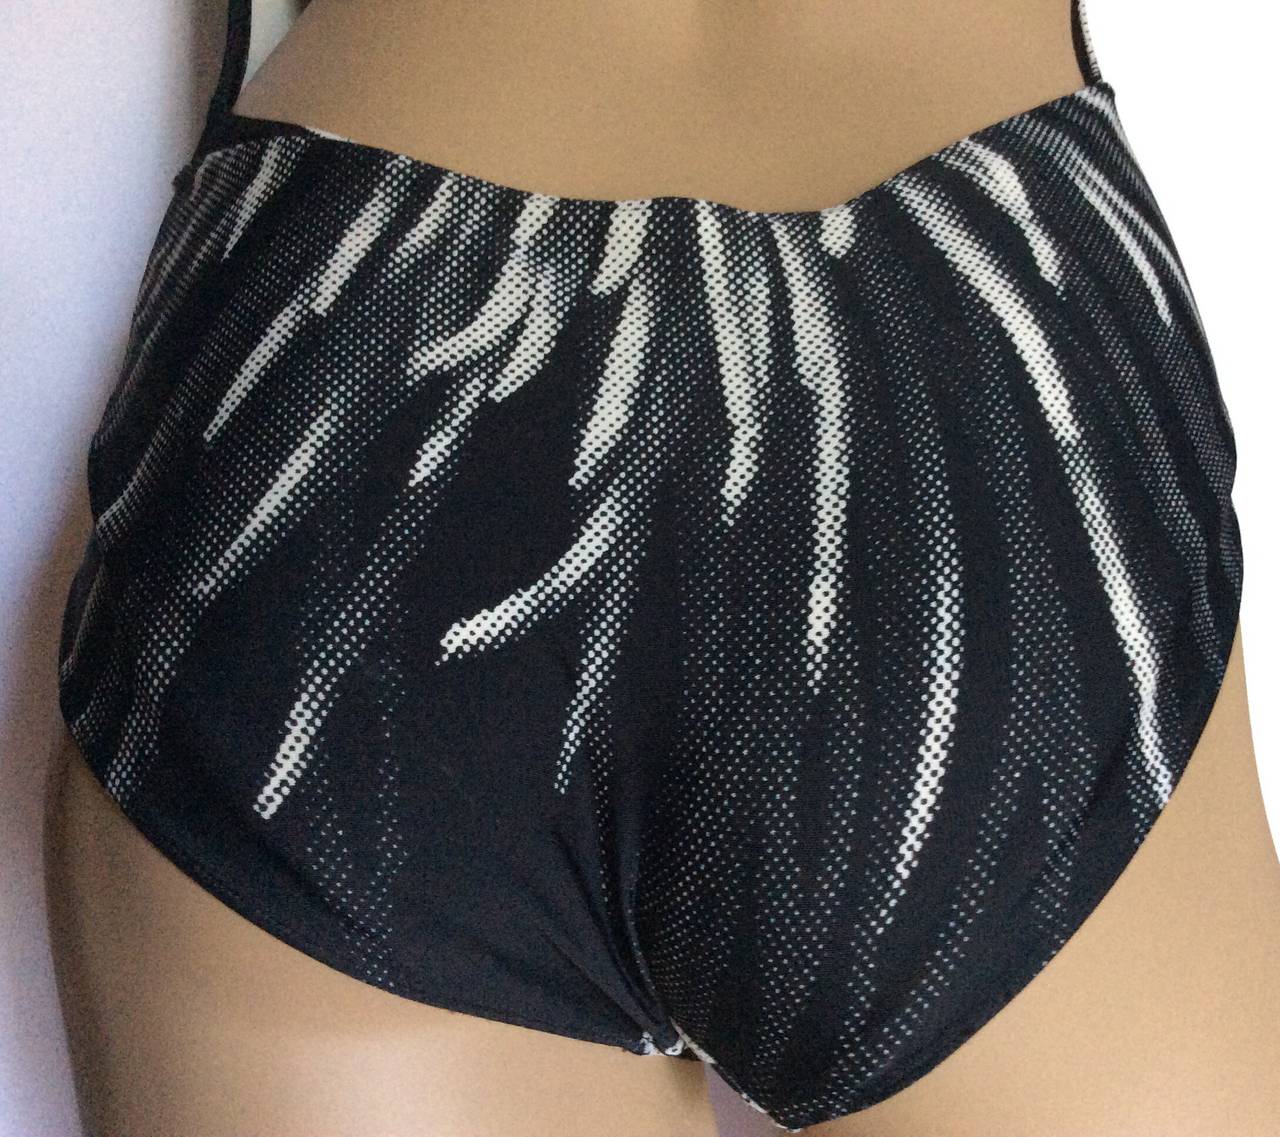 This ia a rare Hermes Paris low plunging monokini black and white bathing suit. 
Signature H silver hardware at neck and at attached wrap. 
Size 38
Bust up to 36